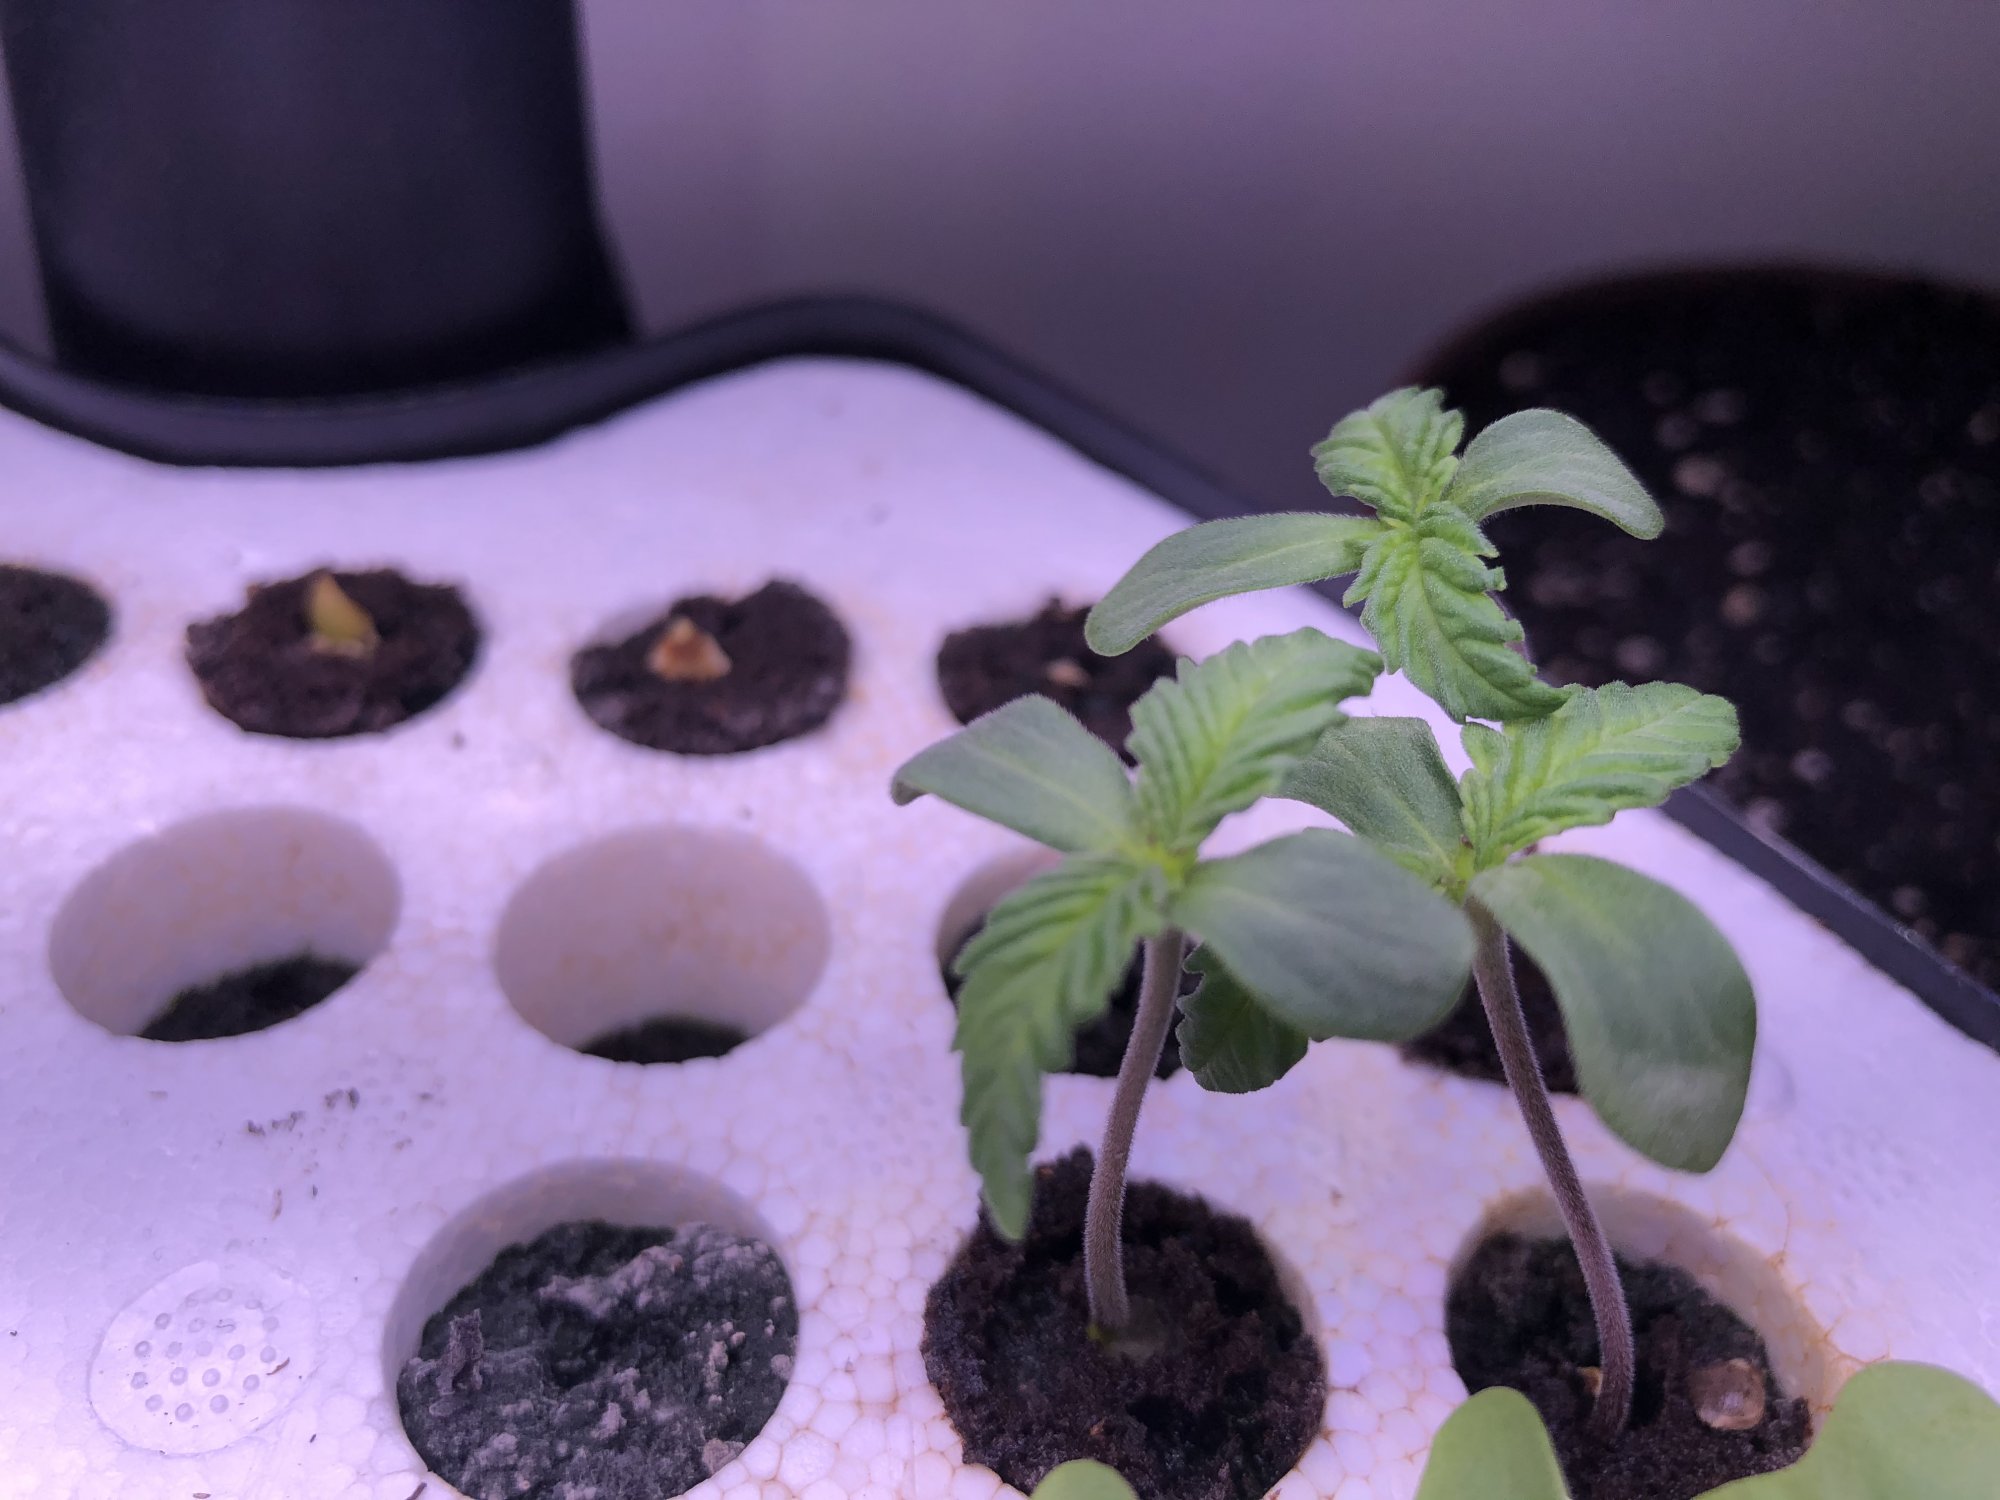 First time grower  help diagnosing please